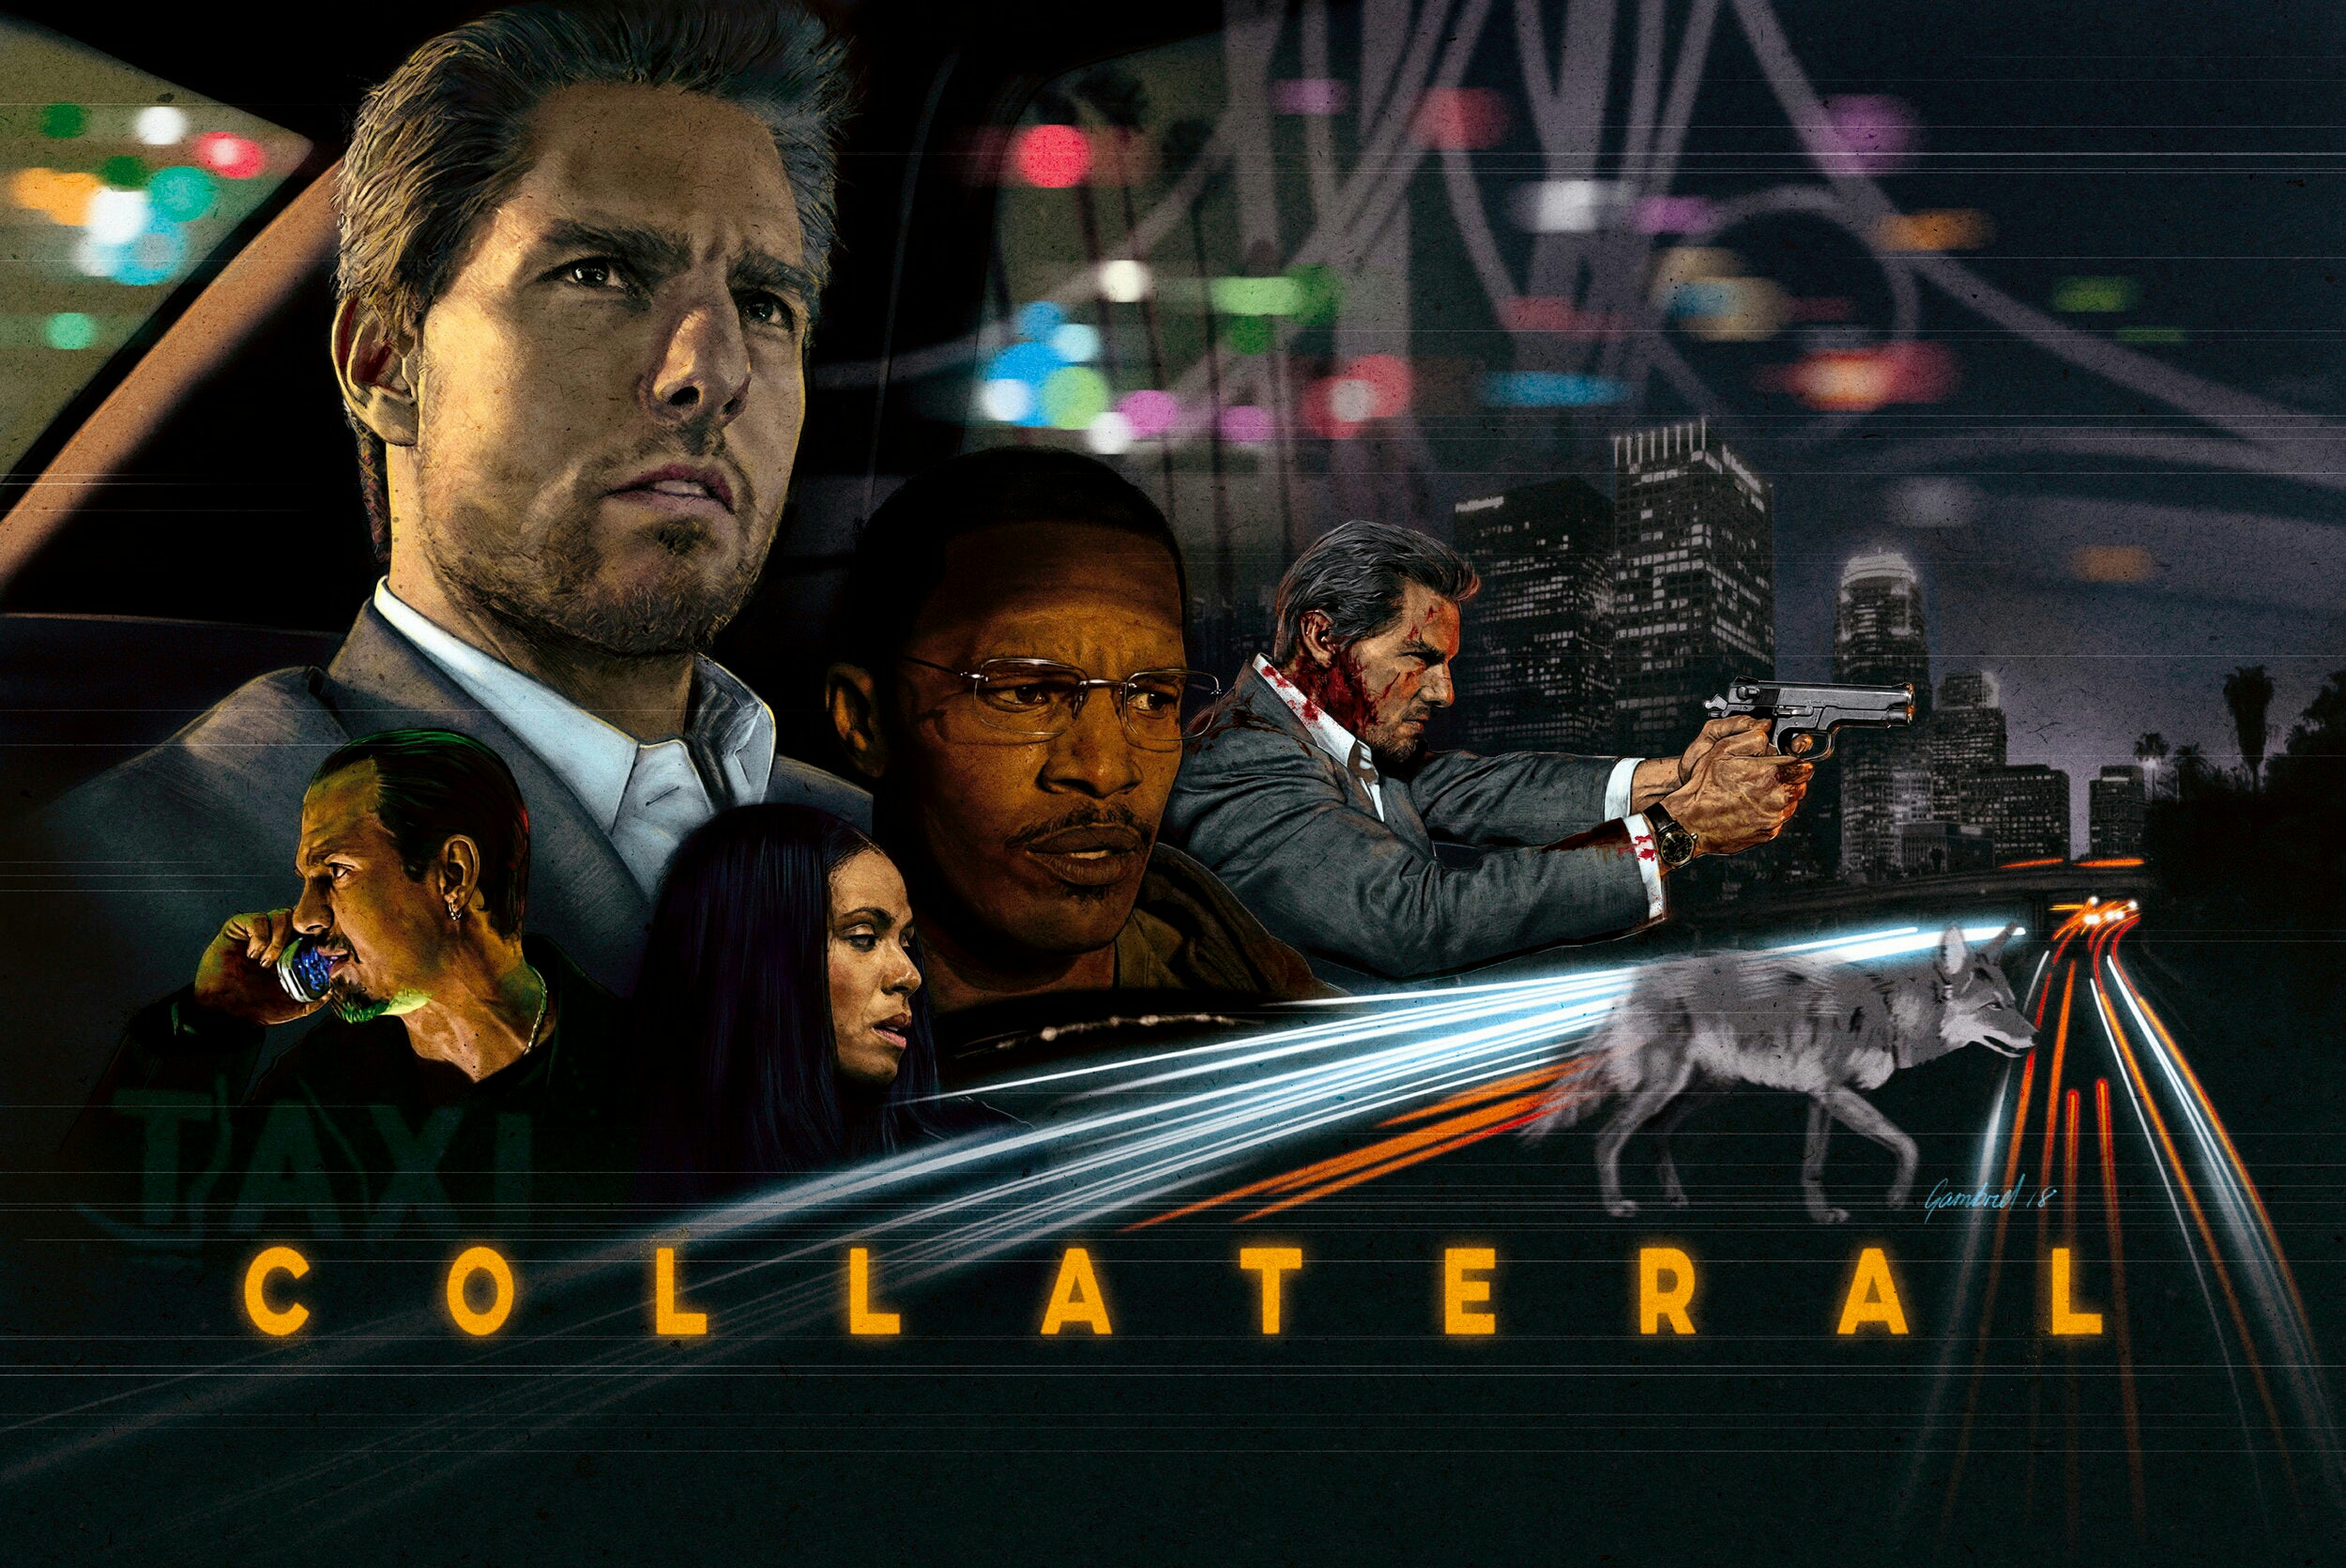 Movie Collateral HD Wallpaper